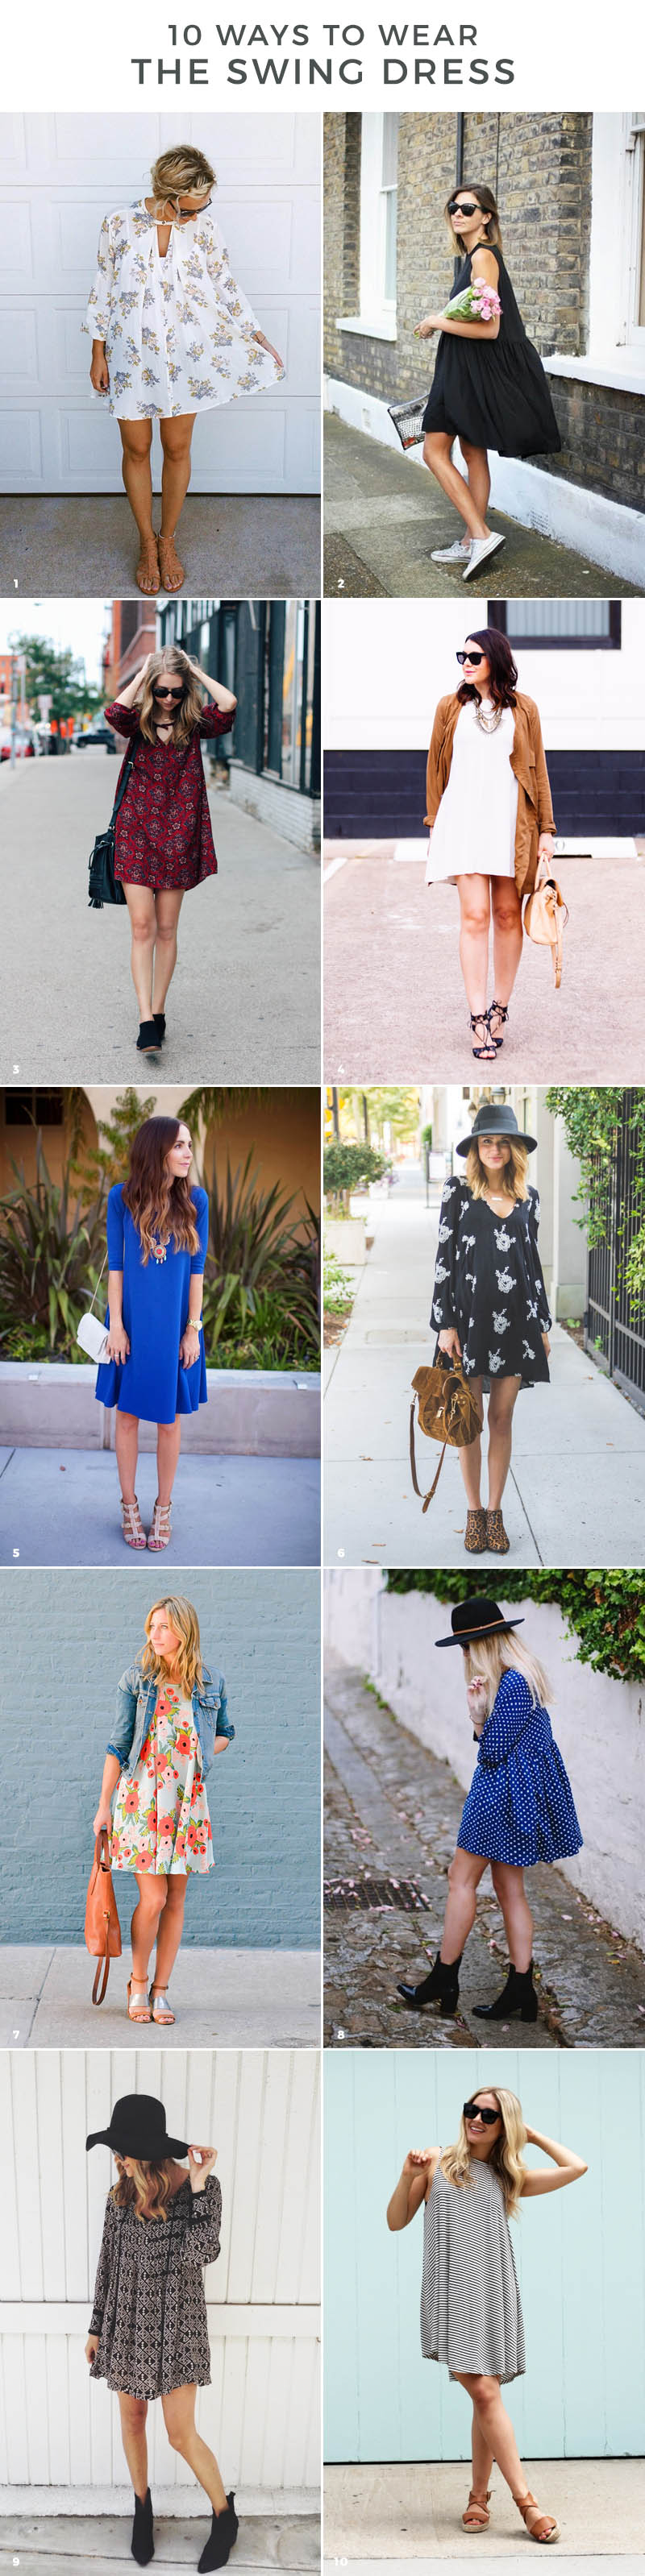 swing dress outfit ideas for spring 2016